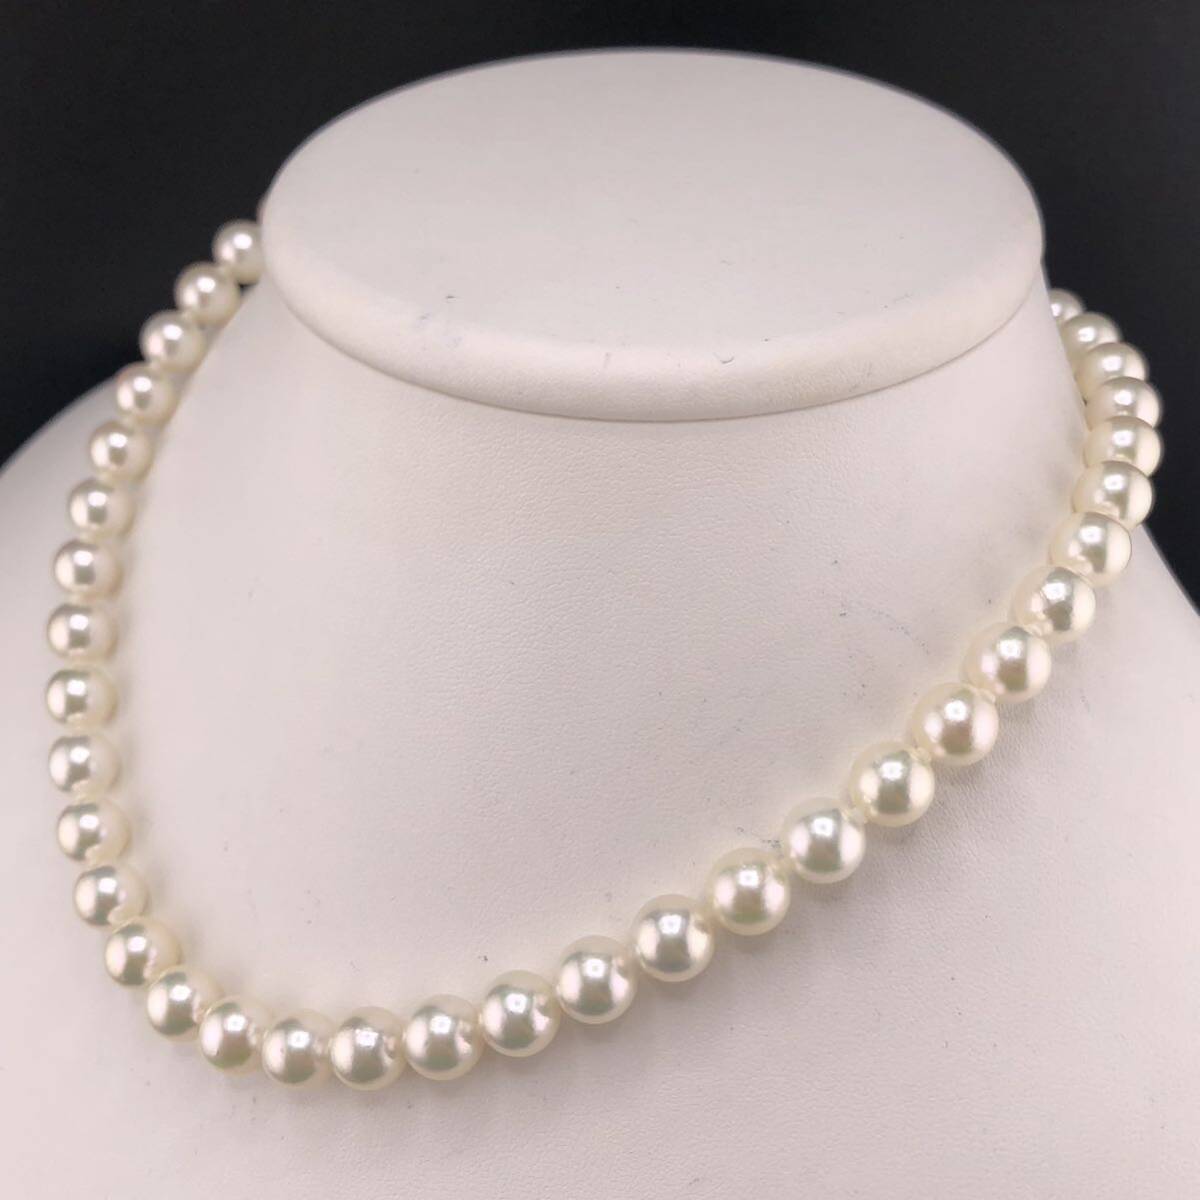 E04-6178 鑑別書付き☆アコヤパールネックレス 8.0mm~8.5mm 40cm 39.8g ( アコヤ真珠 Pearl necklace SILVER オーロラ jewelry )の画像2